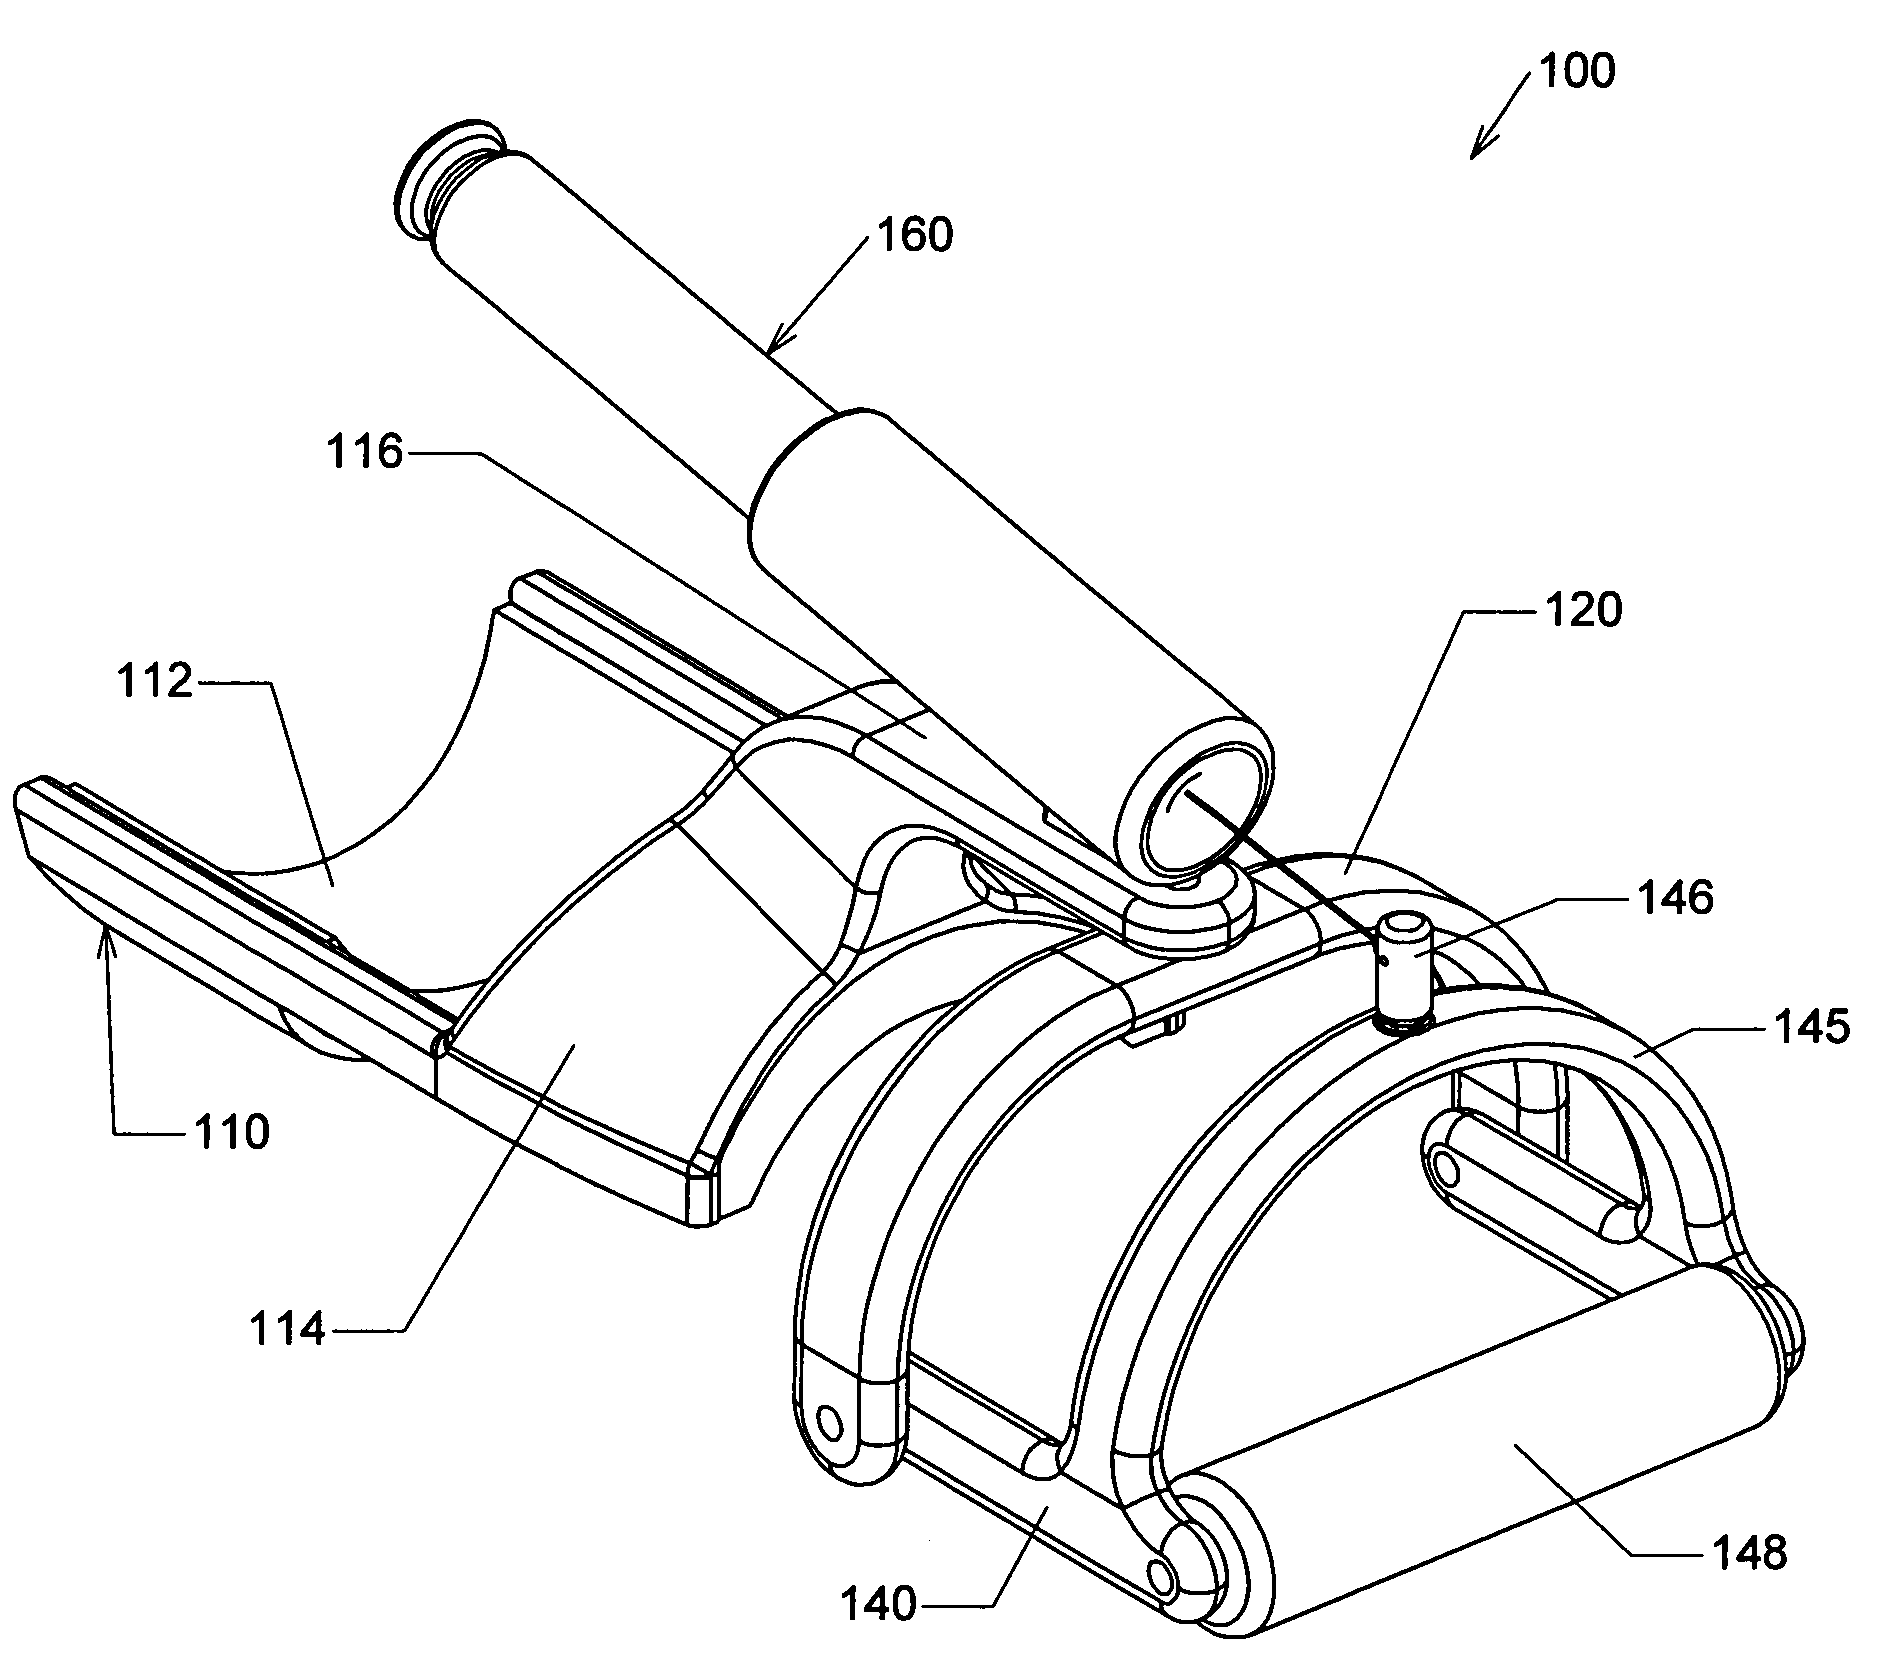 Wrist and forearm exercise methods and apparatus